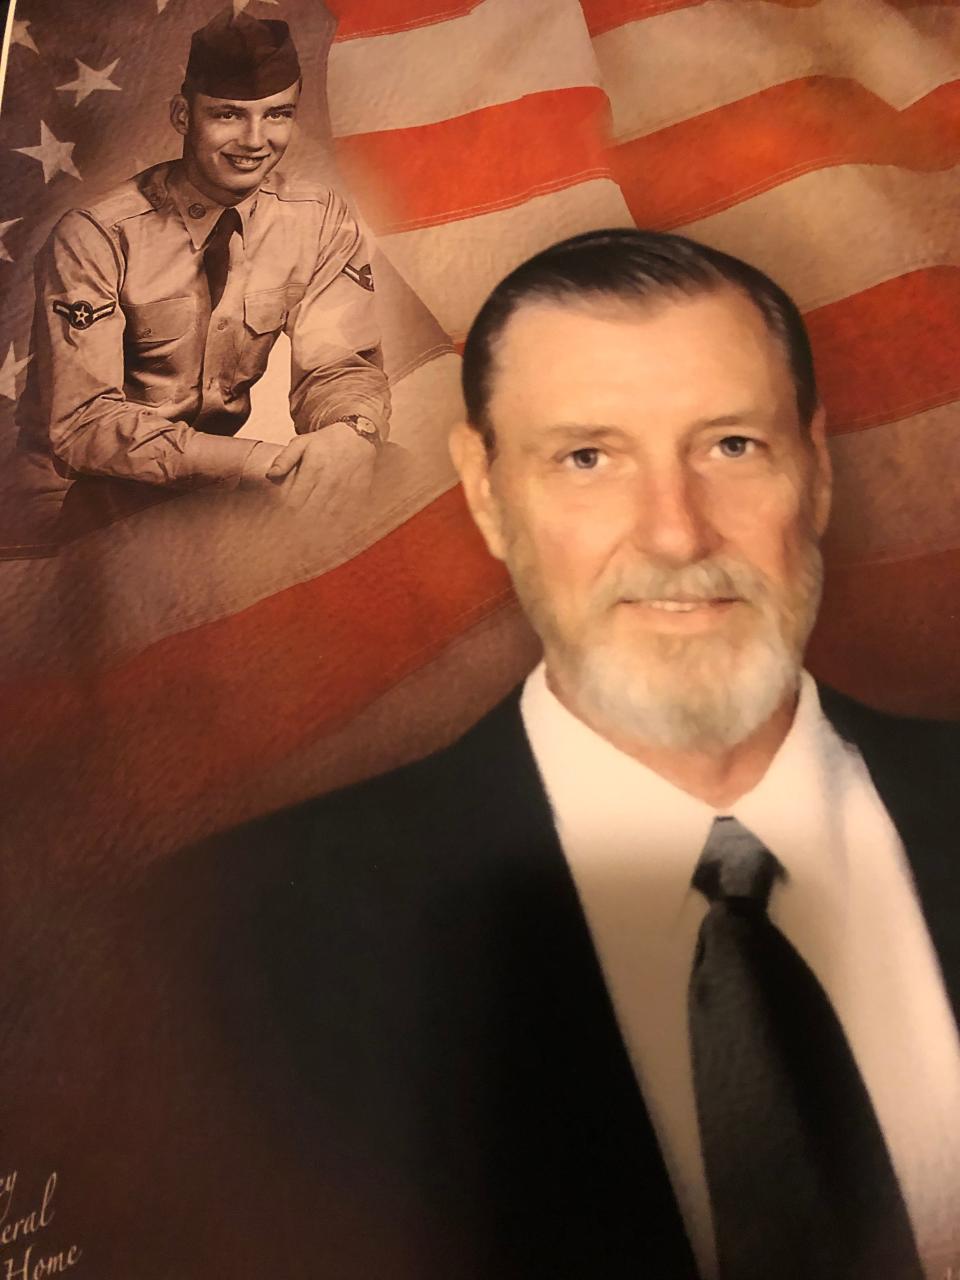 Air Force veteran George Nelson Shaw Sr., died on on April 10, 2018, at the VA hospital in Clarksburg, W. Va. His death, ruled a homicide by an Armed Forces examiner, is one of 10 under investigation by federal authorities. He was 81.